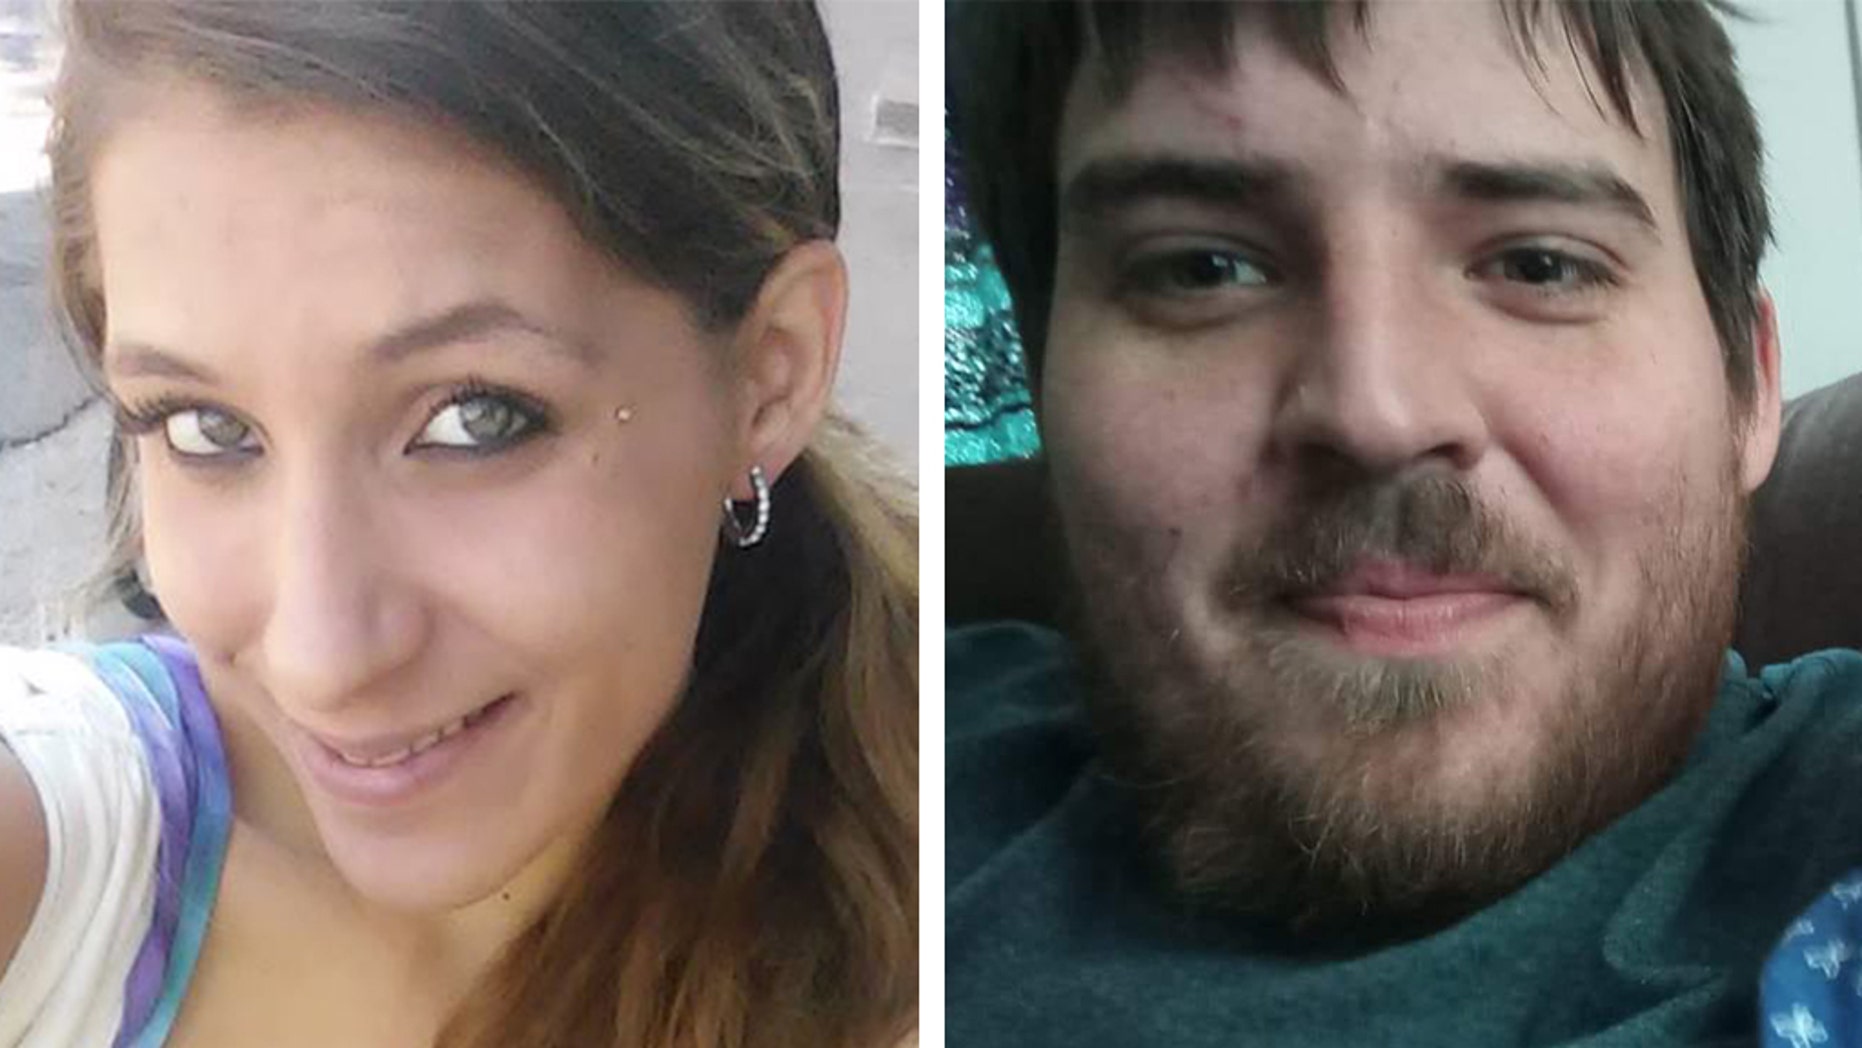 Baby Girl Found In Michigan Motel Room With Her Dead Parents, Investigators Say Jessica-Bramer-and-Christian-Reed